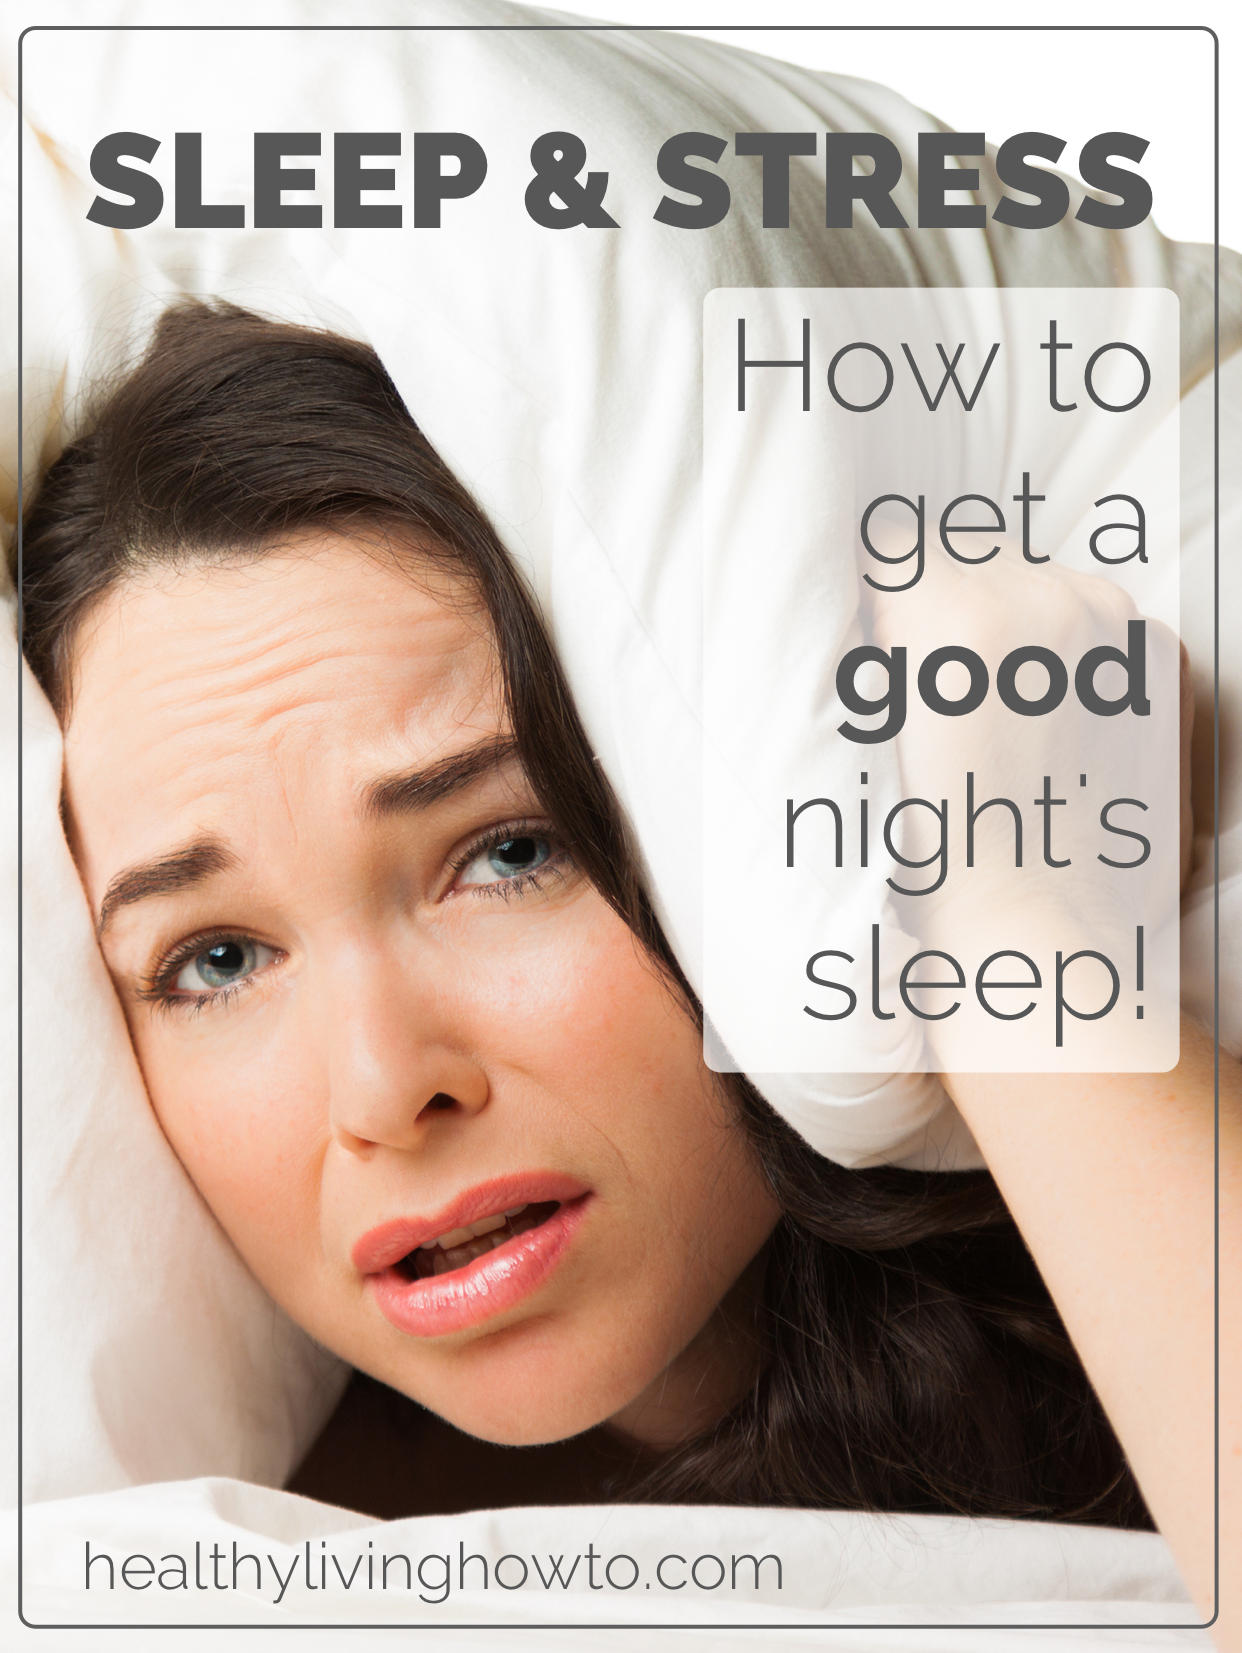 Sleep and Stress: Why You're Not Sawing Logs - Healthy Living How To